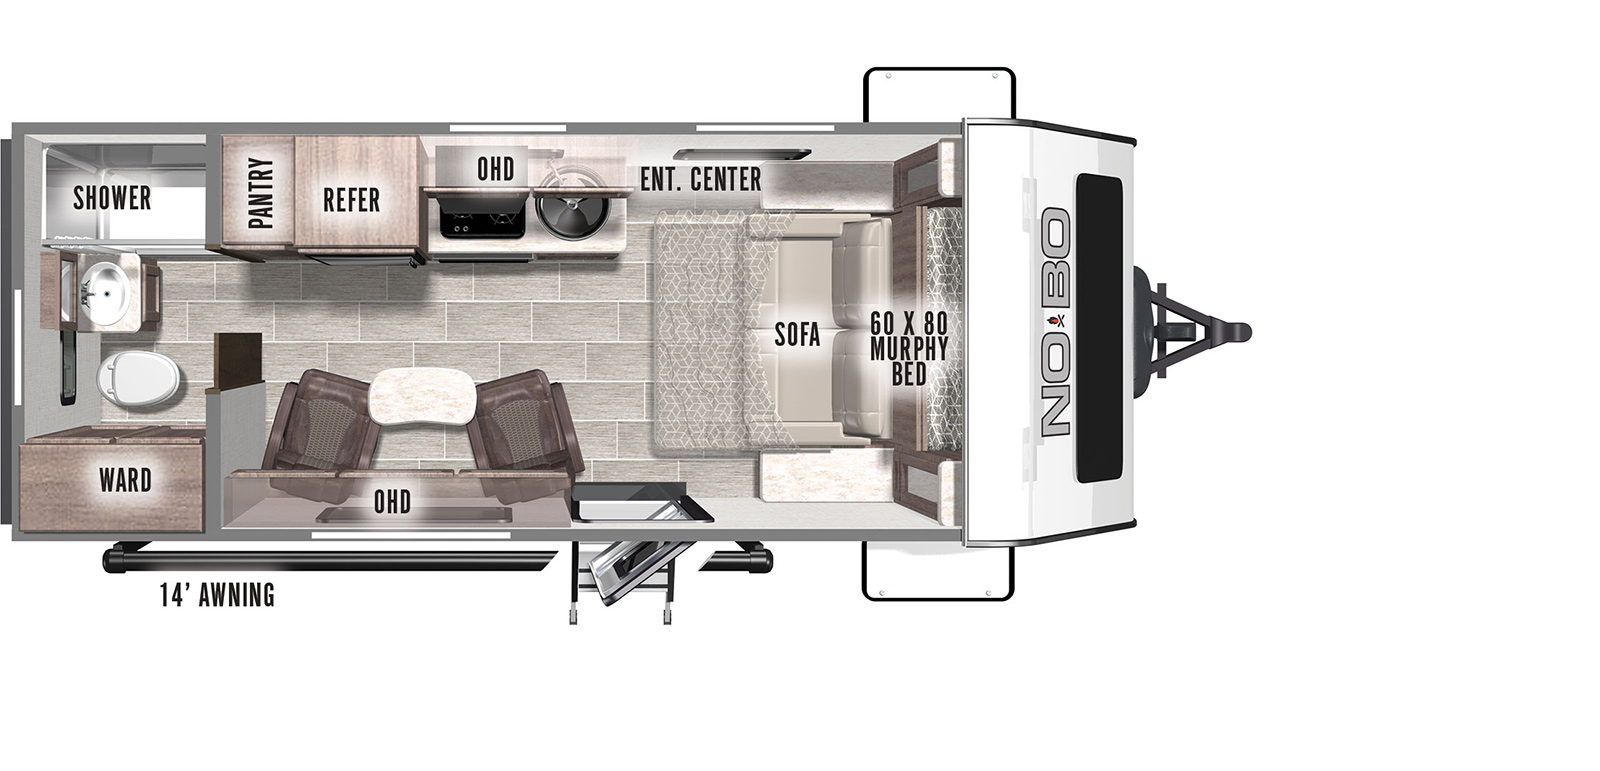 The 19.2 has zero slideouts and one entry door. There is a 14 foot awning on the door side starting at the rear. The interior is an open concept with: a 60 by 80 Murphy bed in the front that converts to a sofa; an entertainment center on the off-door side near the murphy bed; a kitchen counter on the off-door side across from the entry door containing a pantry, refrigerator, cooktop stove, round kitchen sink and overhead cabinet; two chairs with a table across from the kitchen counter; And a rear bathroom with shower, vanity, medicine cabinet, toilet and wardrobe.